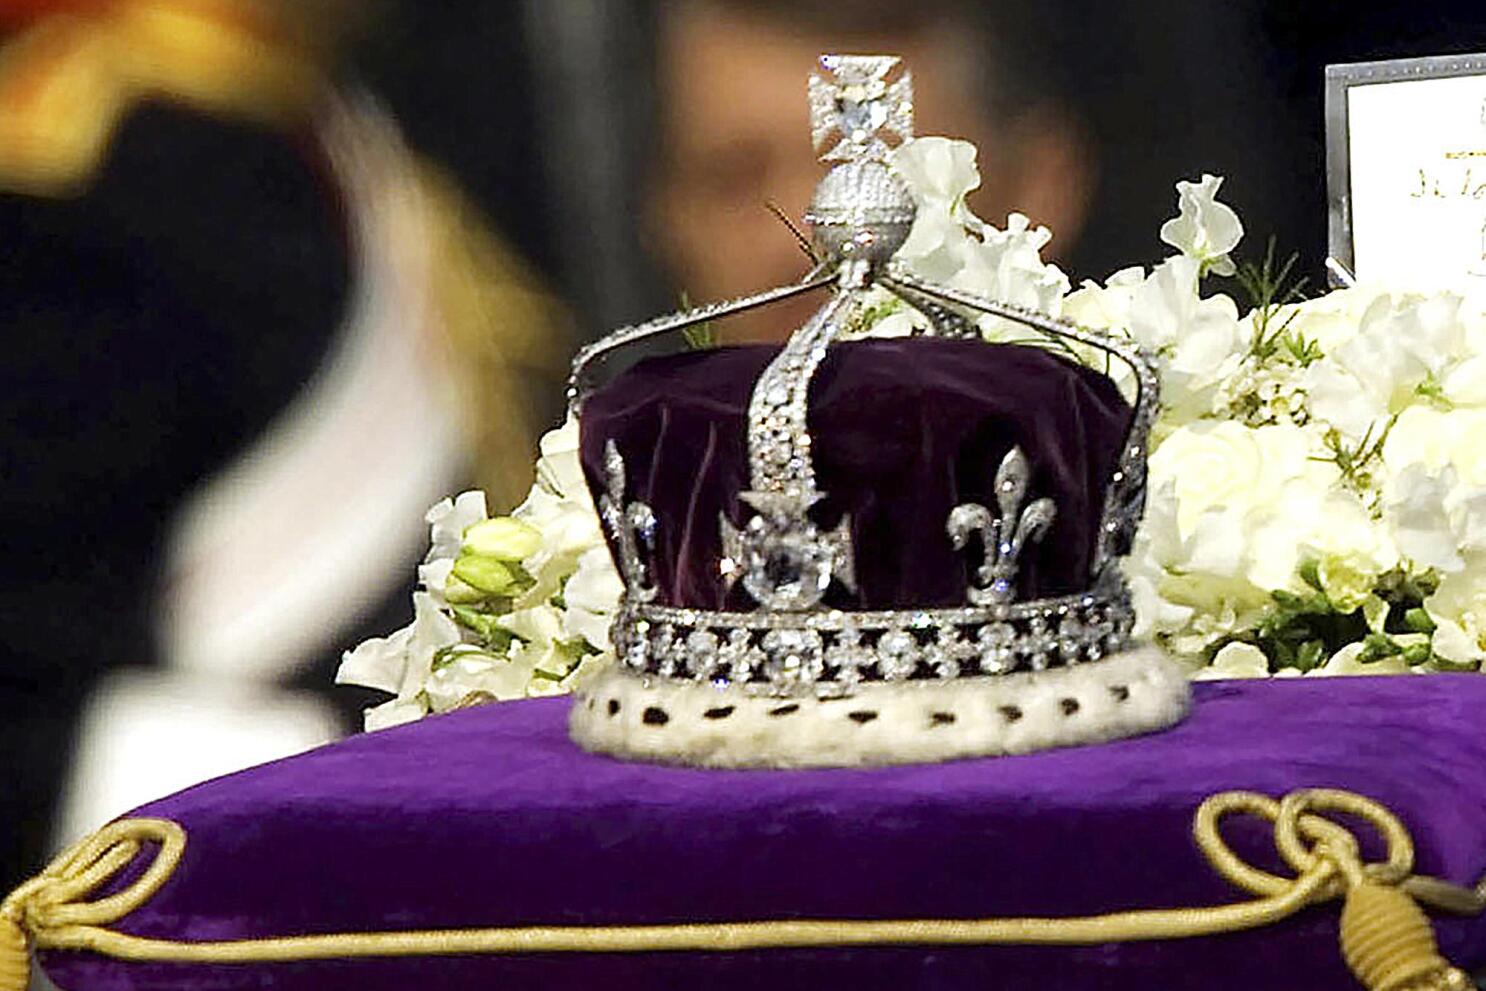 Queen Consort will not wear Koh-i-Noor at Charles' coronation